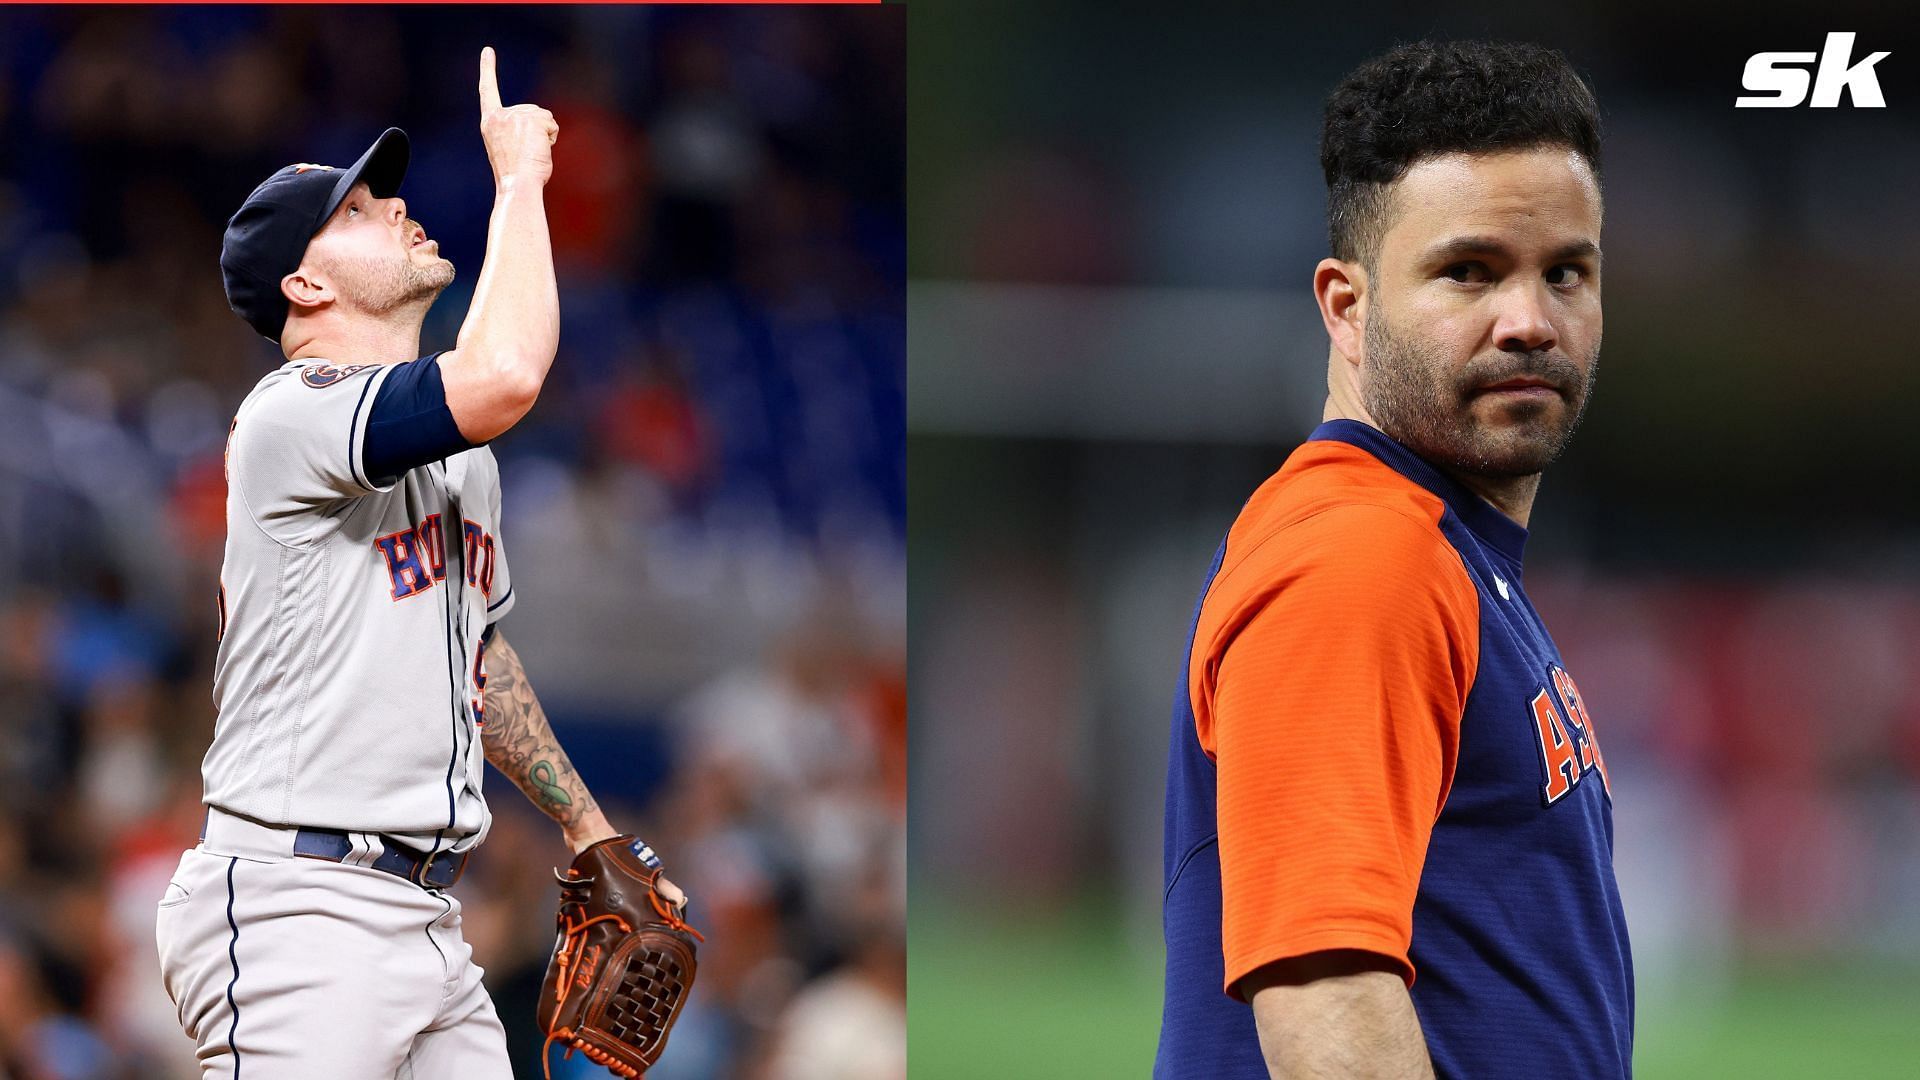 Houston Astros star Jose Altuve can't wait to see Ryan Pressly on